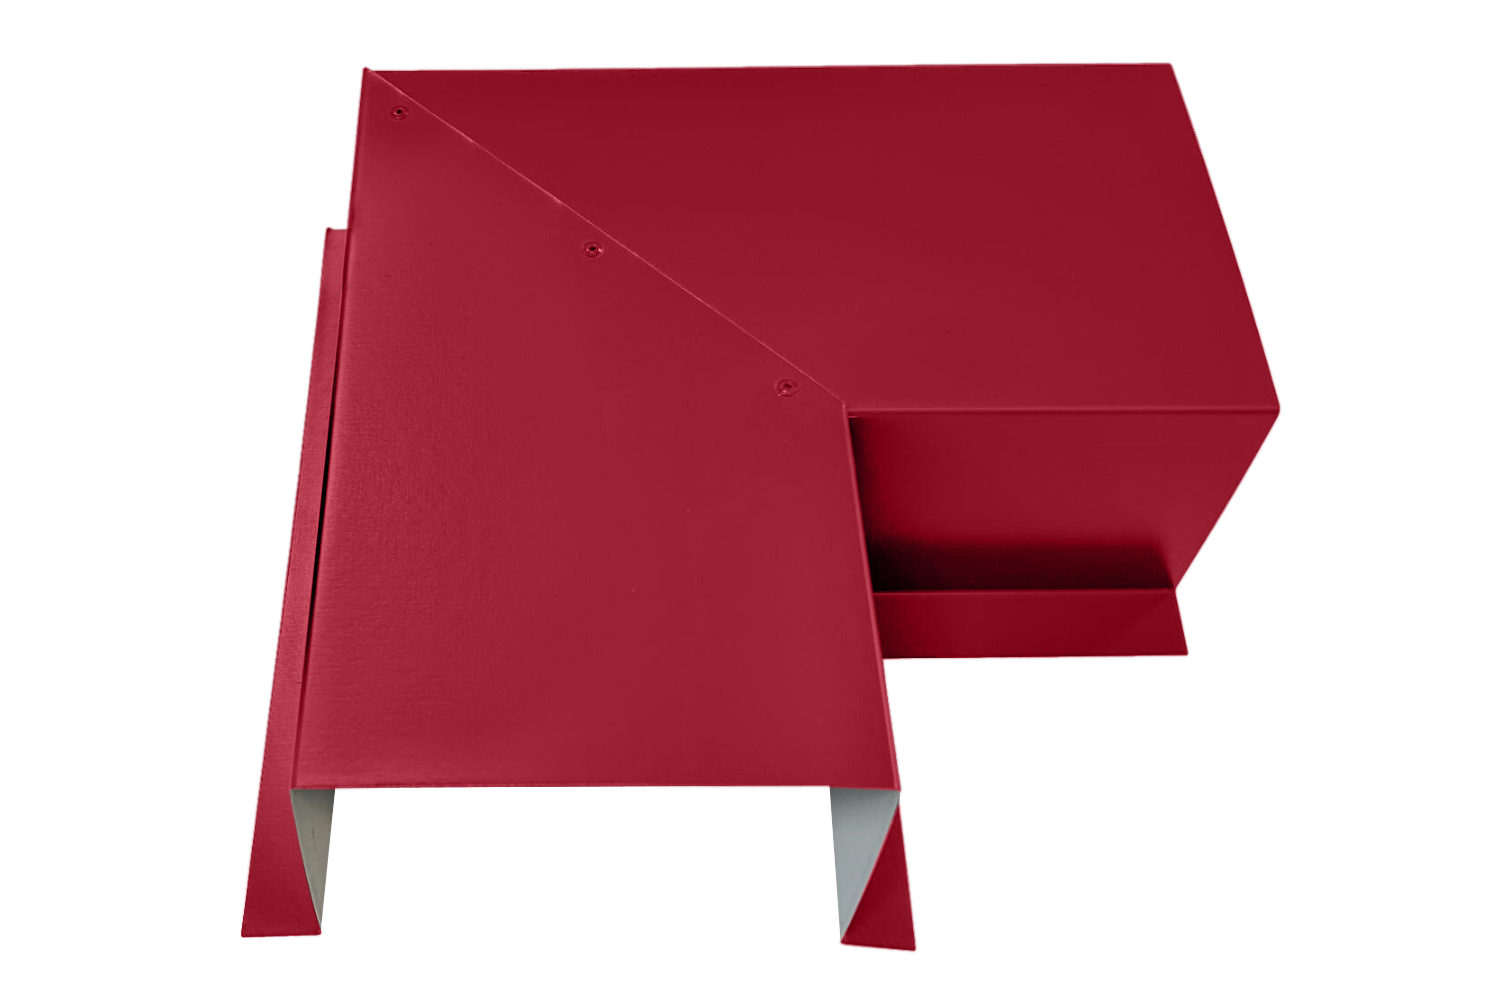 A red, angular geometric object with multiple flat surfaces and folded edges, resembling an abstract piece of modern art. Crafted from premium quality 24 gauge steel, its various planes intersect at different angles, creating a complex and intriguing shape. This is the Commercial Series - 24 Gauge Line Set Cover Side Turning Elbows - Premium Quality by Perma Cover.